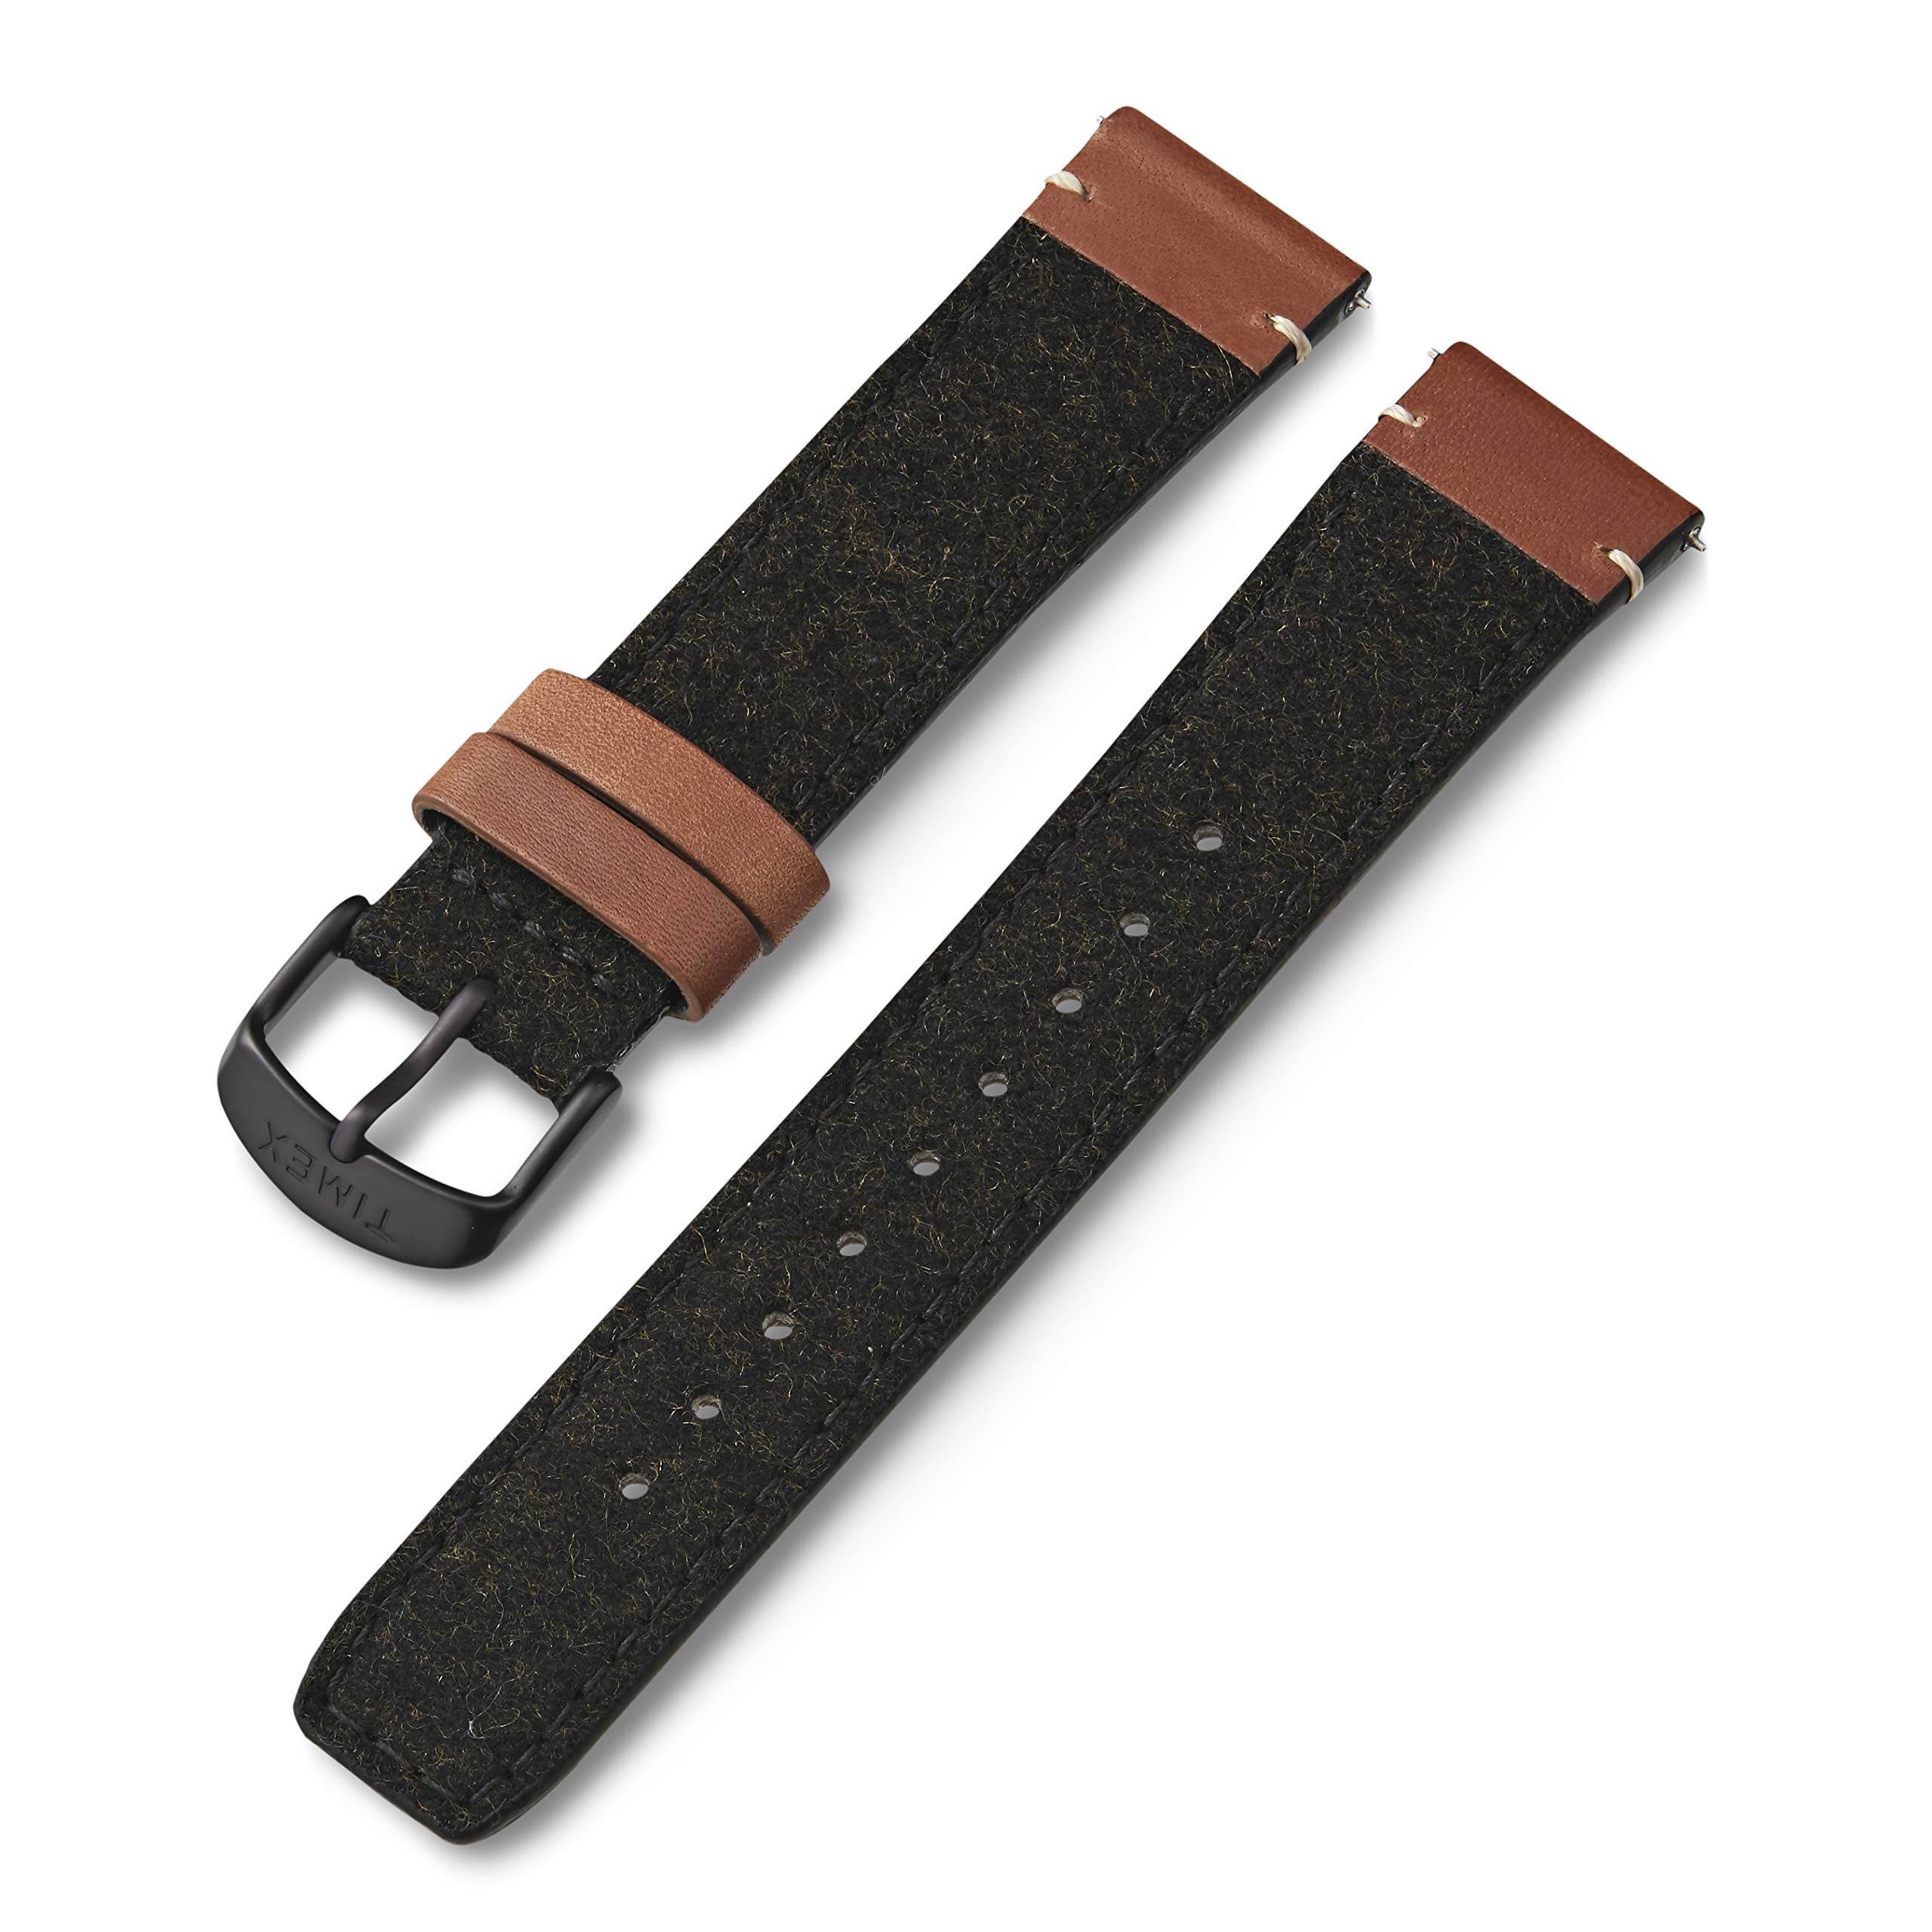 Timex 20mm Fabric & Genuine Leather Strap – Tan & Brown with Silver-Tone Buckle